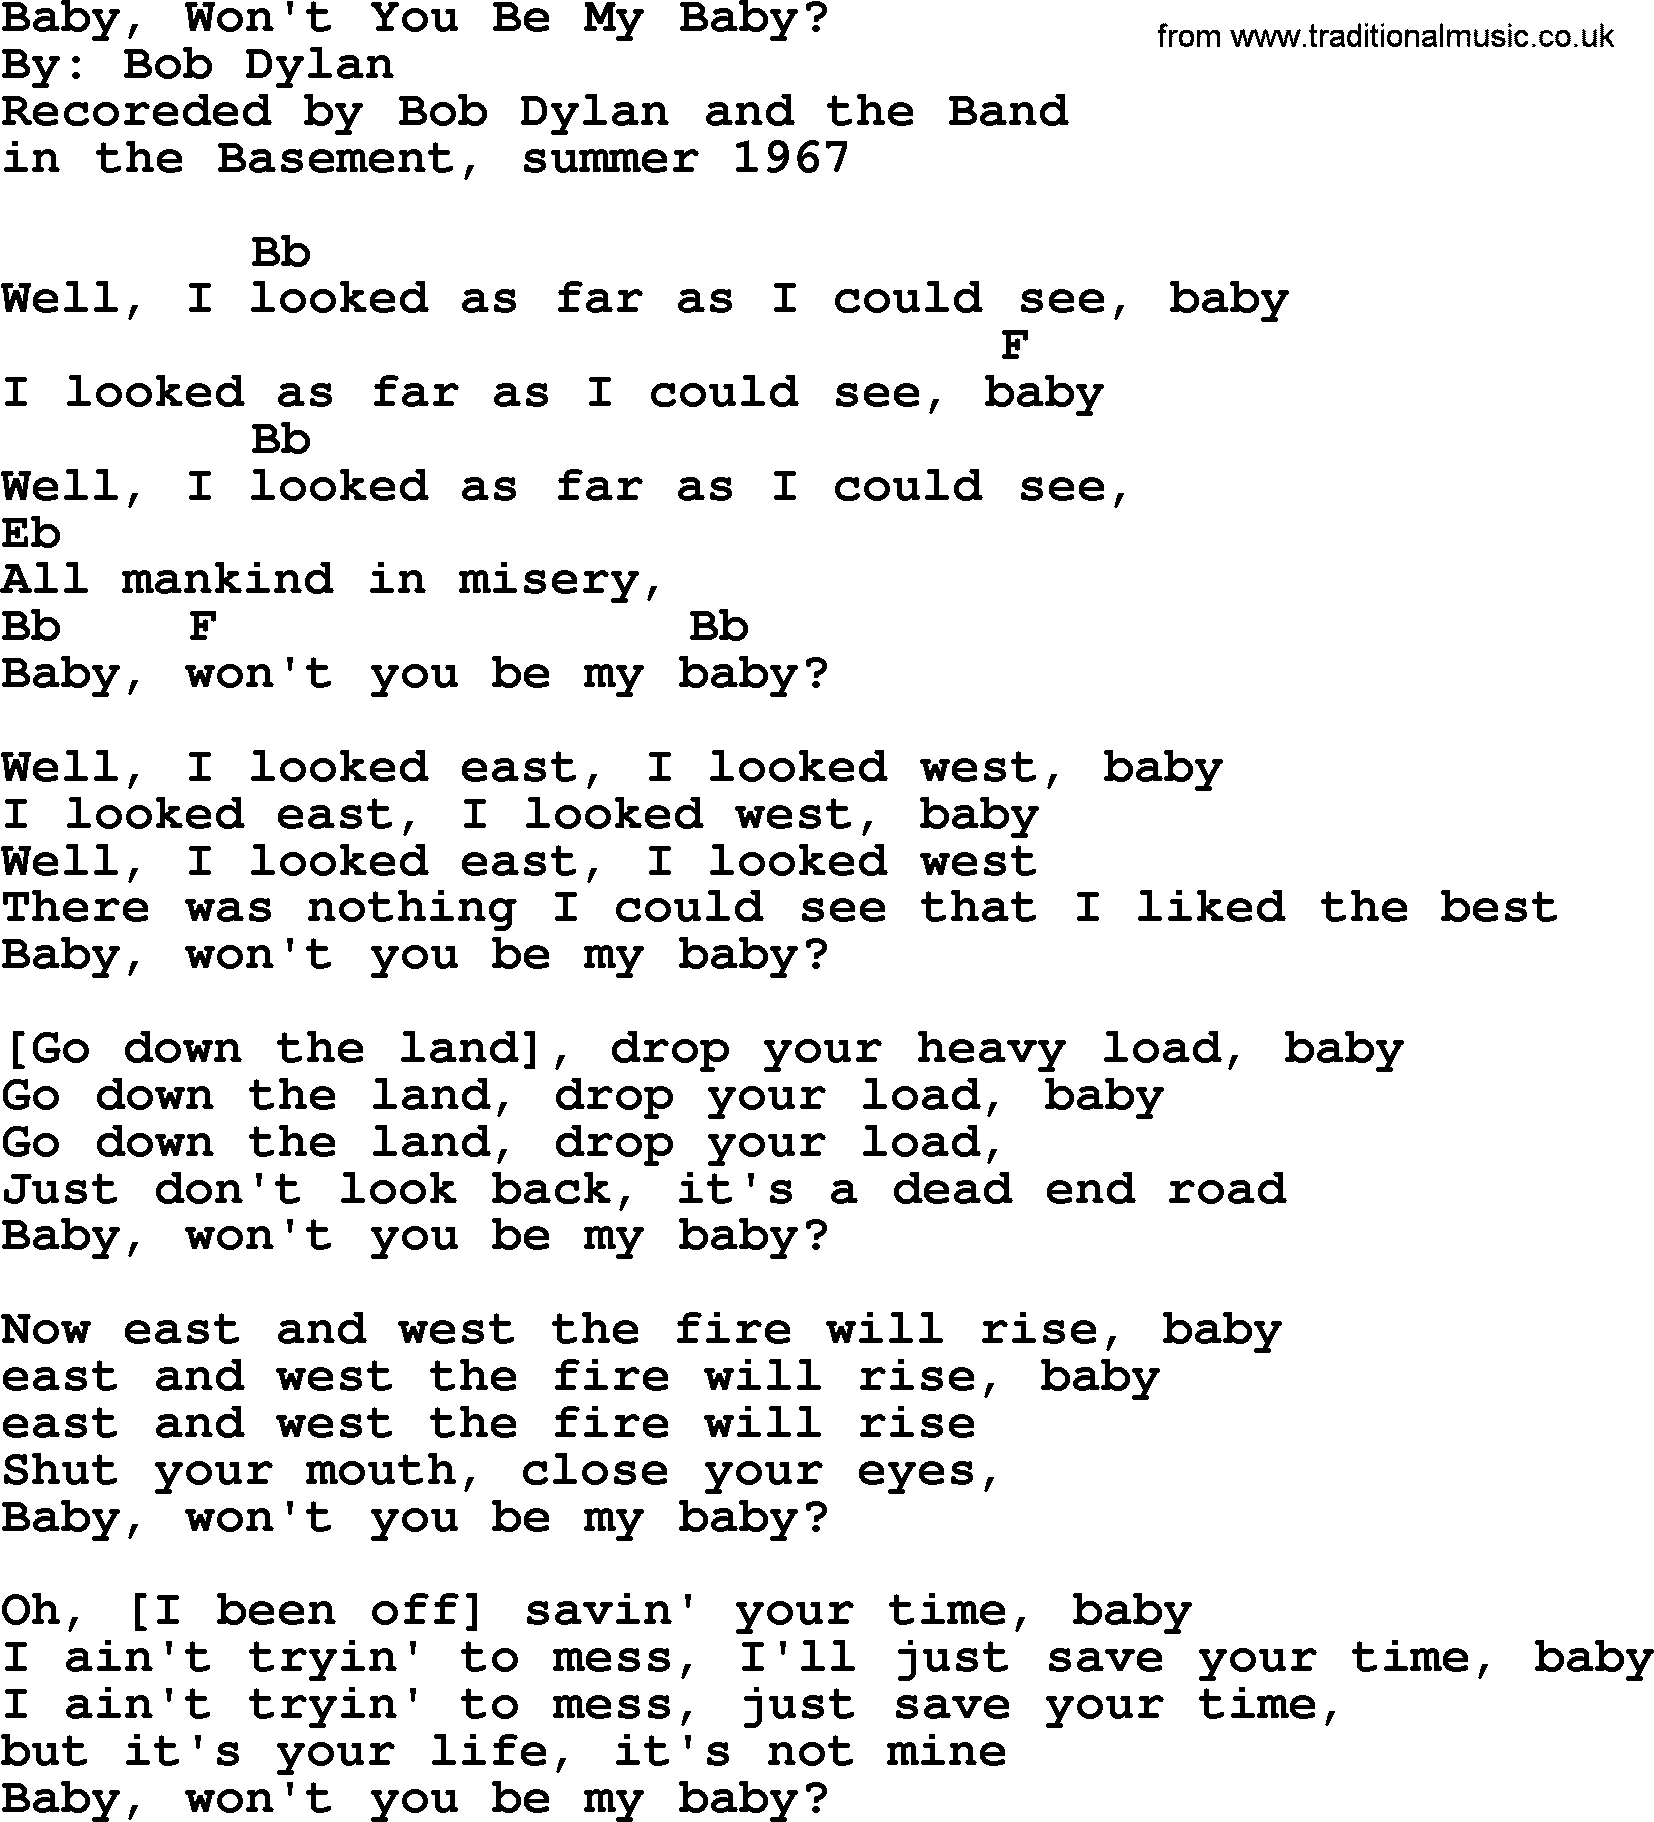 Bob Dylan song, lyrics with chords - Baby, Won't You Be My Baby